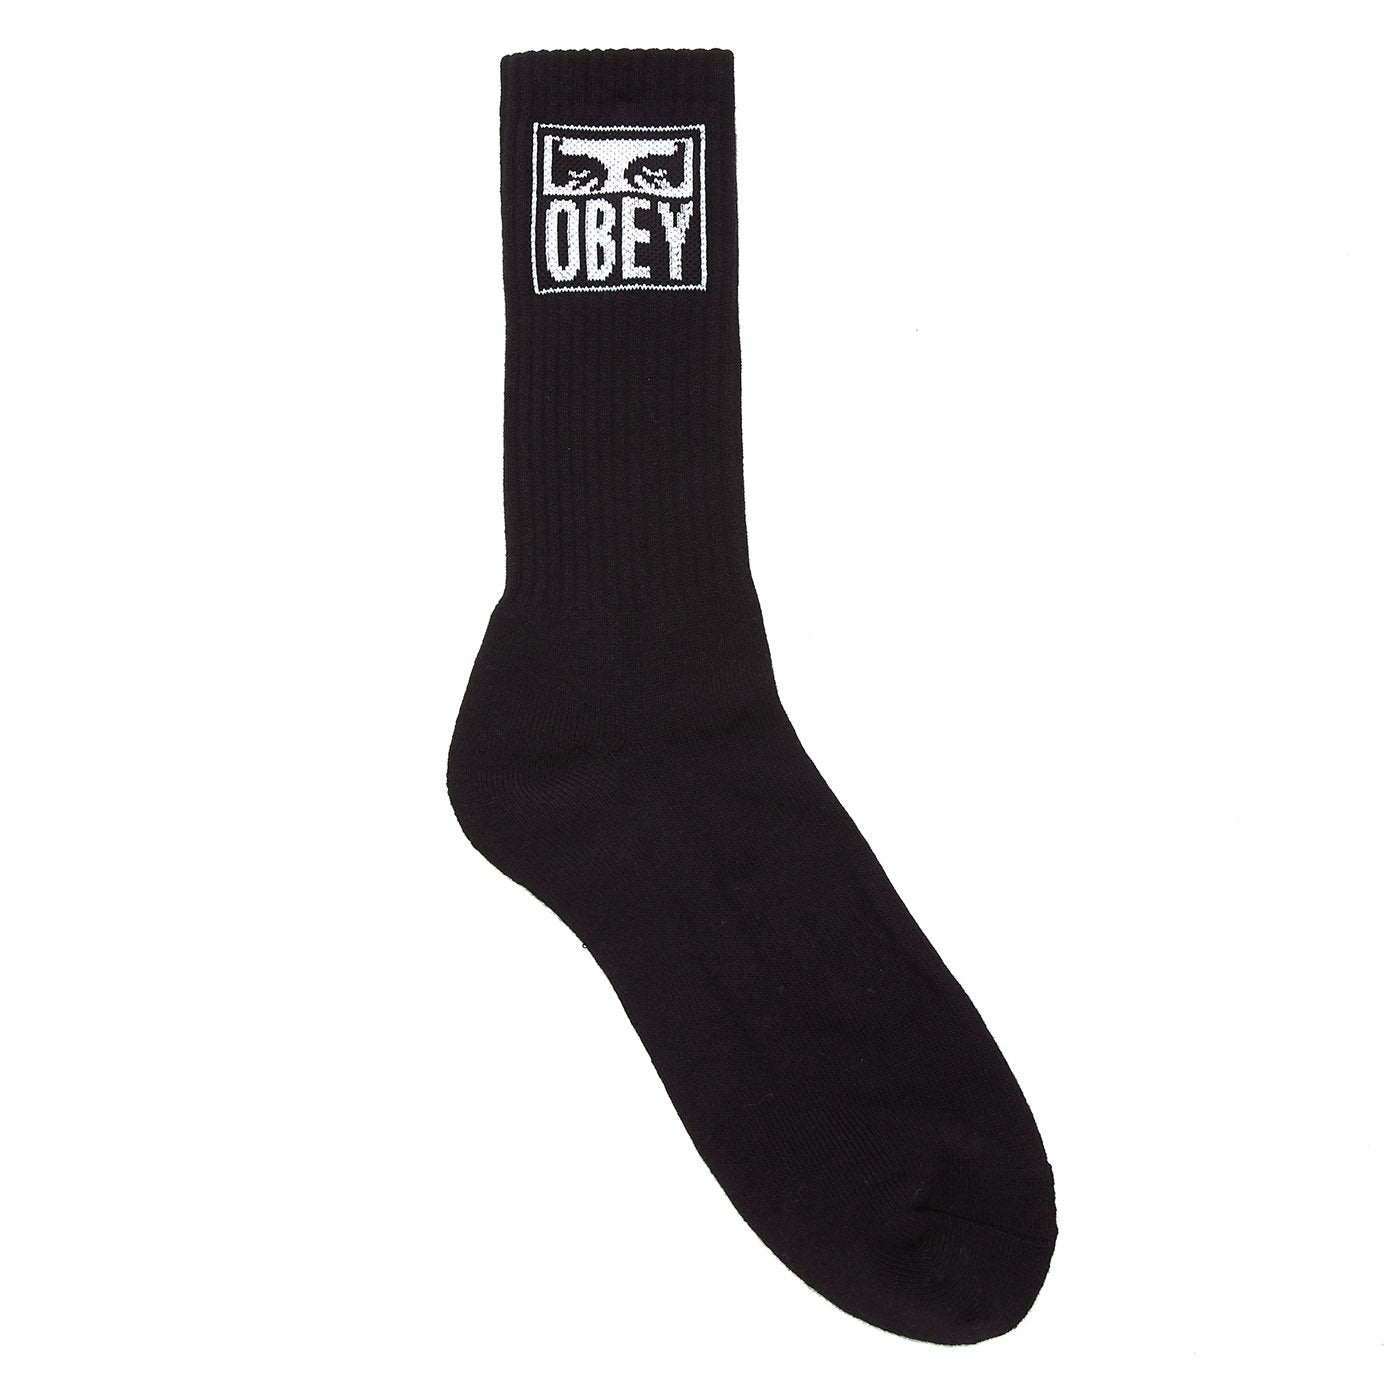 Calcetines Obey EYES ICON Negro